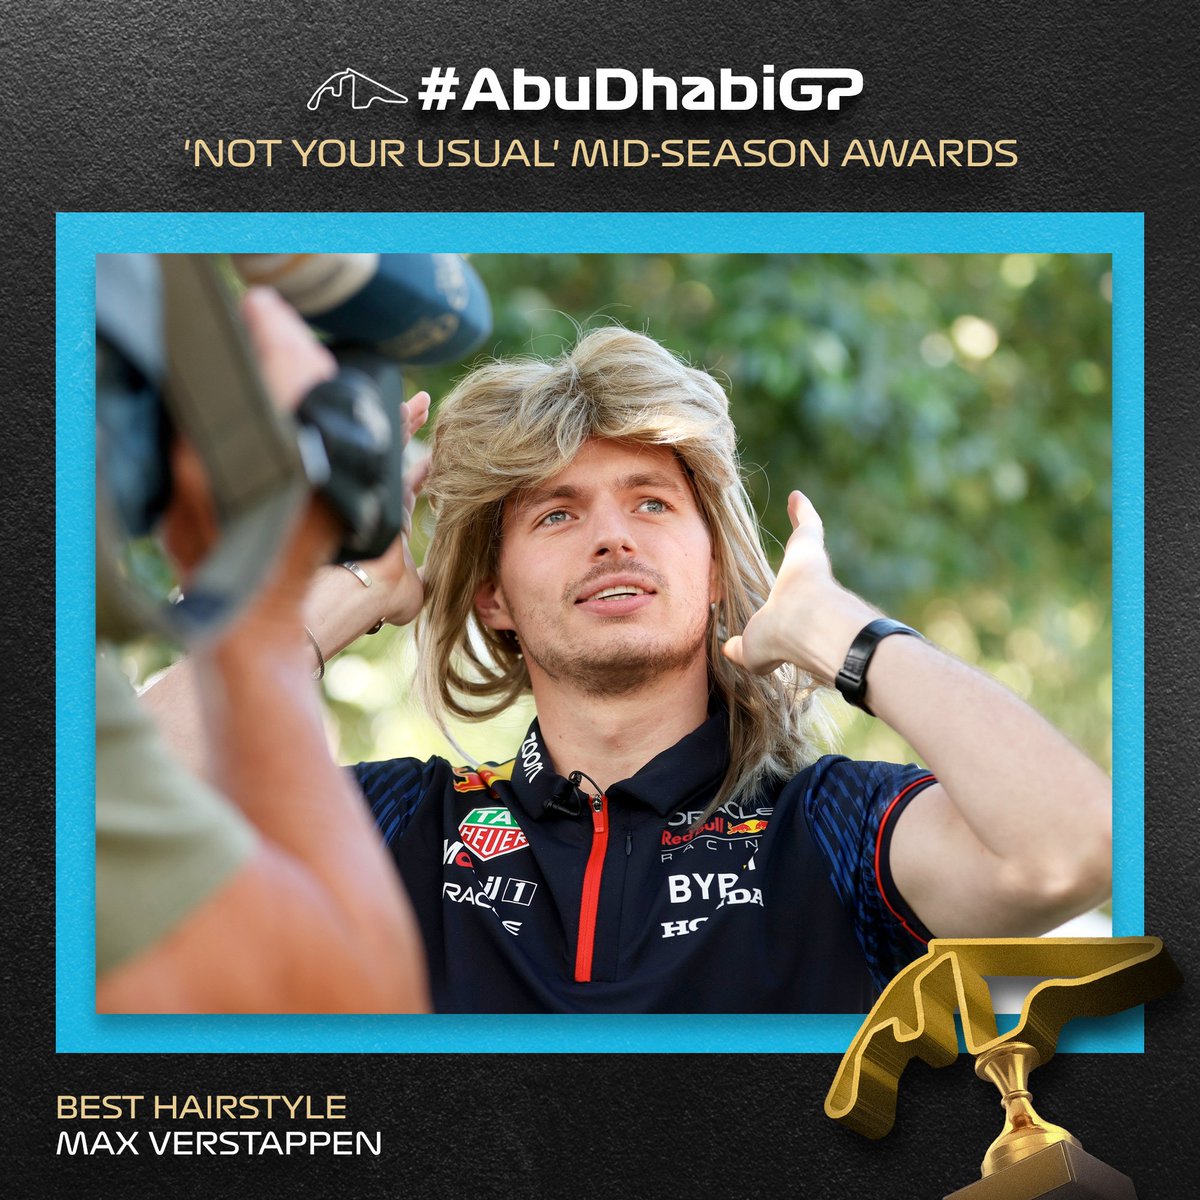 Hats off (or should we say hair off?) to @Max33Verstappen for snagging the Best Hairstyle Award! 🏆

In a hairy showdown between Verstappen and Bottas, Max took his mullet to an uncharted level of new heights. 😂

#AbuDhabiGP #MidSeasonAwards #F1 #Formula1 @F1